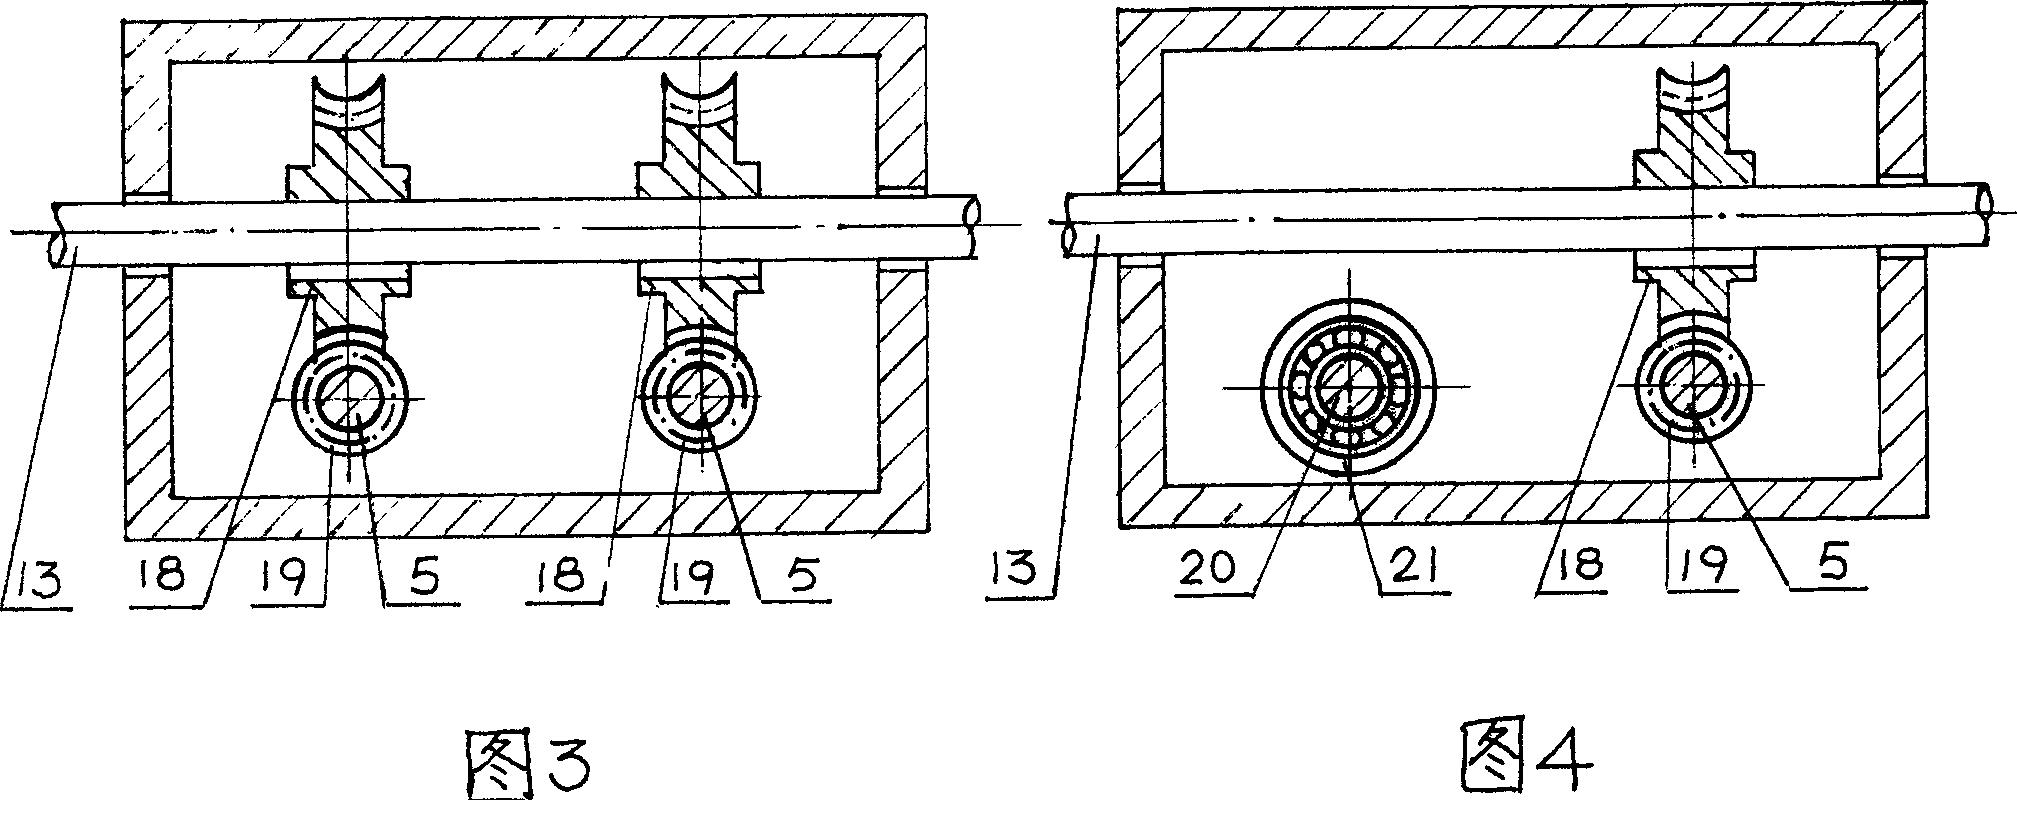 Automobile powered lifting device